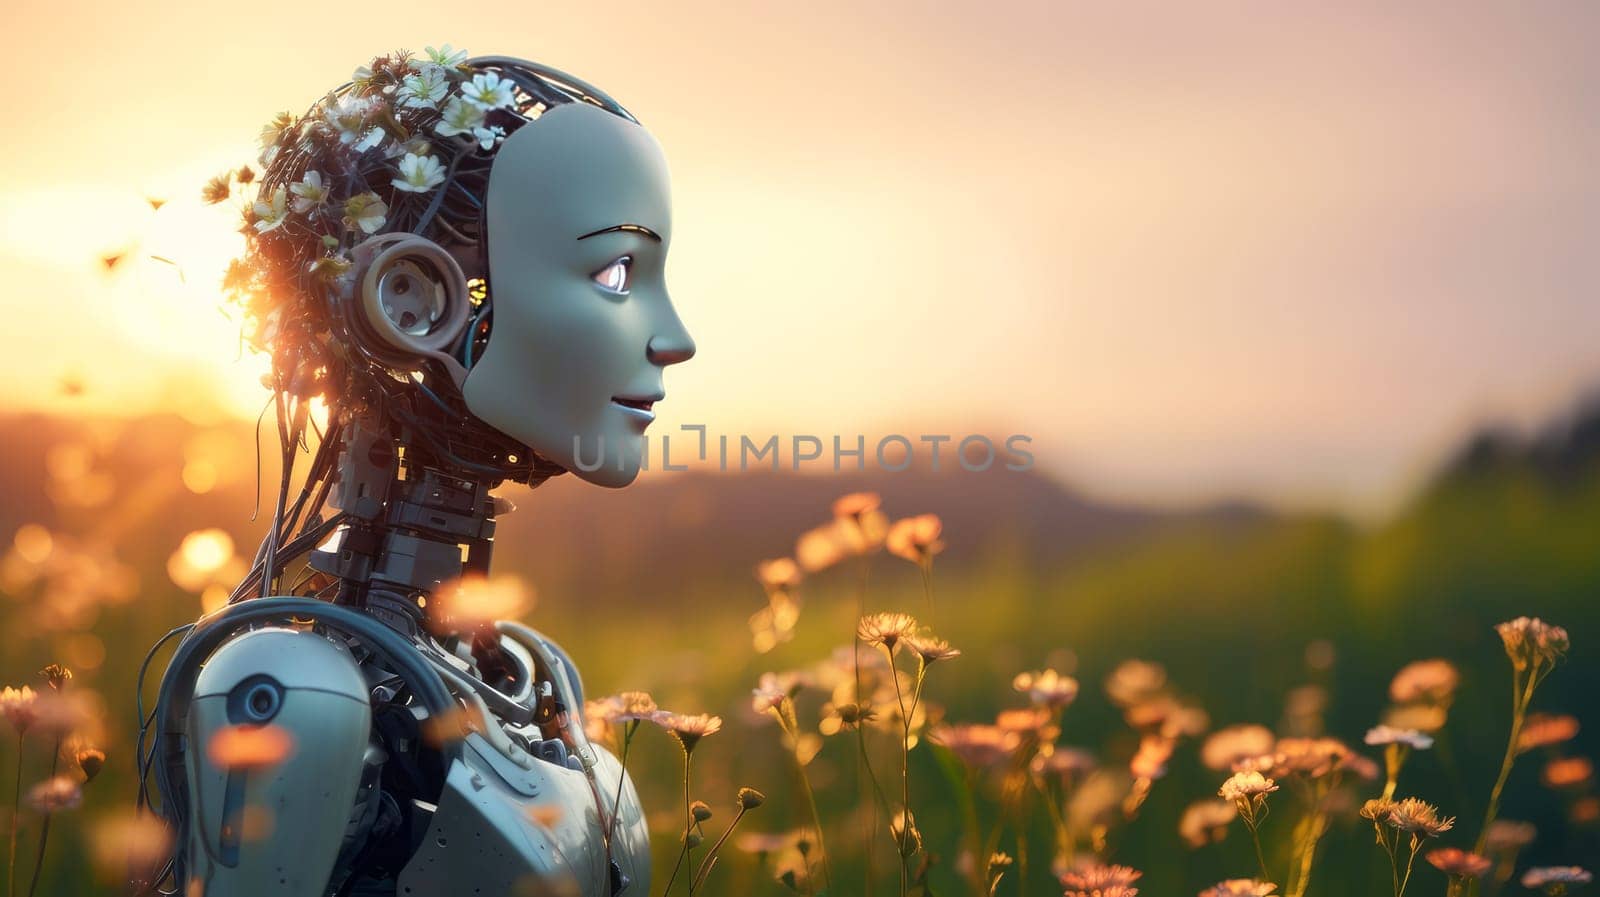 A happy smiling robot with artificial intelligence walks through a meadow of blooming flowers on a sunny day, future technology. Internet and digital technologies. Global network. Integrating technology and human interaction. Digital technologies of the future